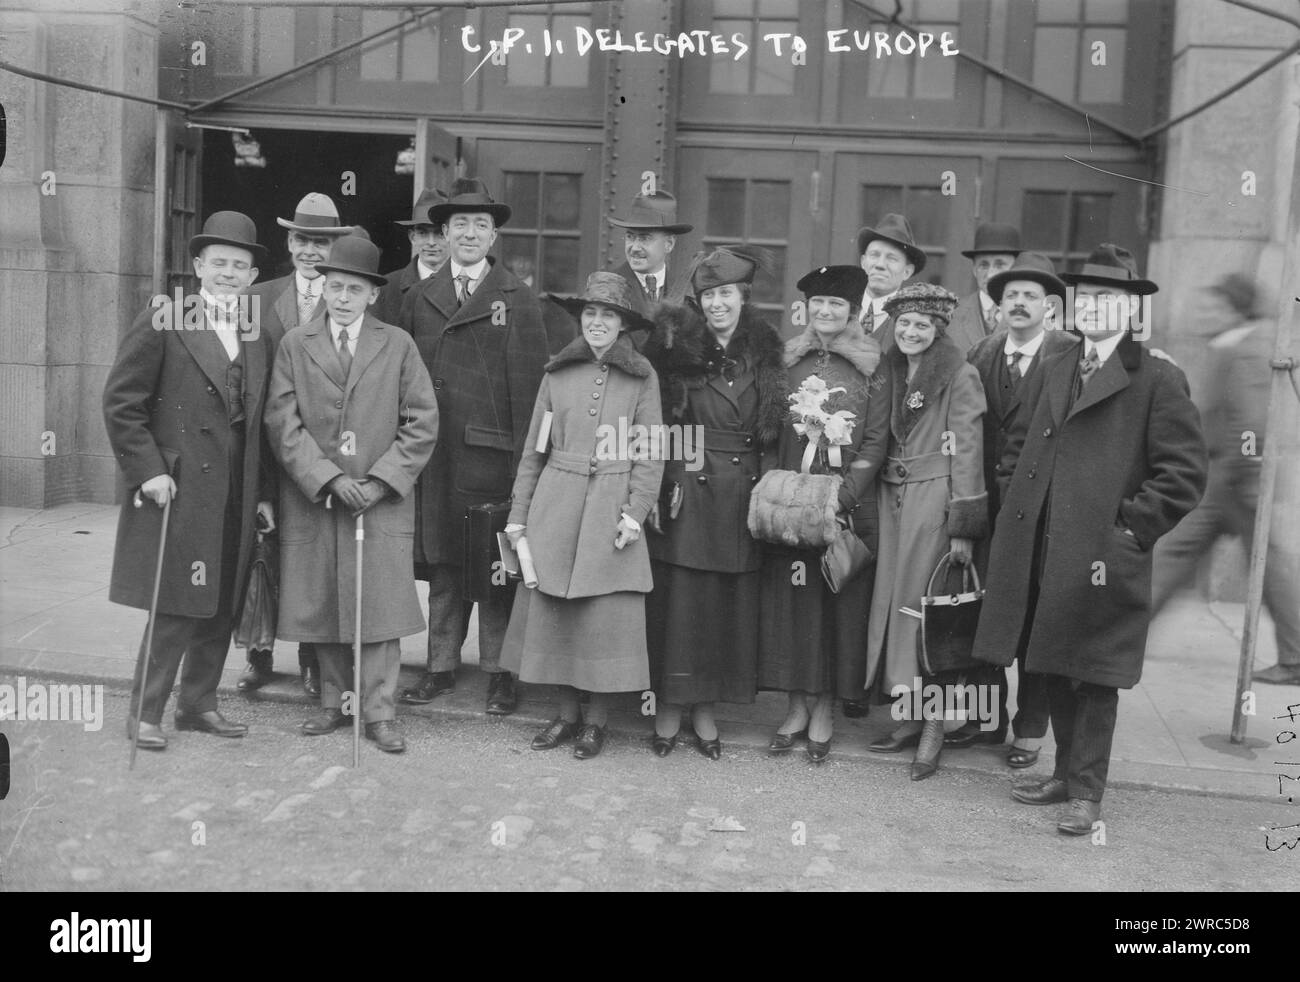 C.P.I. Delegates to Europe, Photograph shows members of the Committee on Public Information (CPI), a U.S. government agency which worked to persuade Americans to support World War I. Shown second from the right is public relations expert Edward Bernays., between ca. 1915 and ca. 1920, Glass negatives, 1 negative: glass Stock Photo